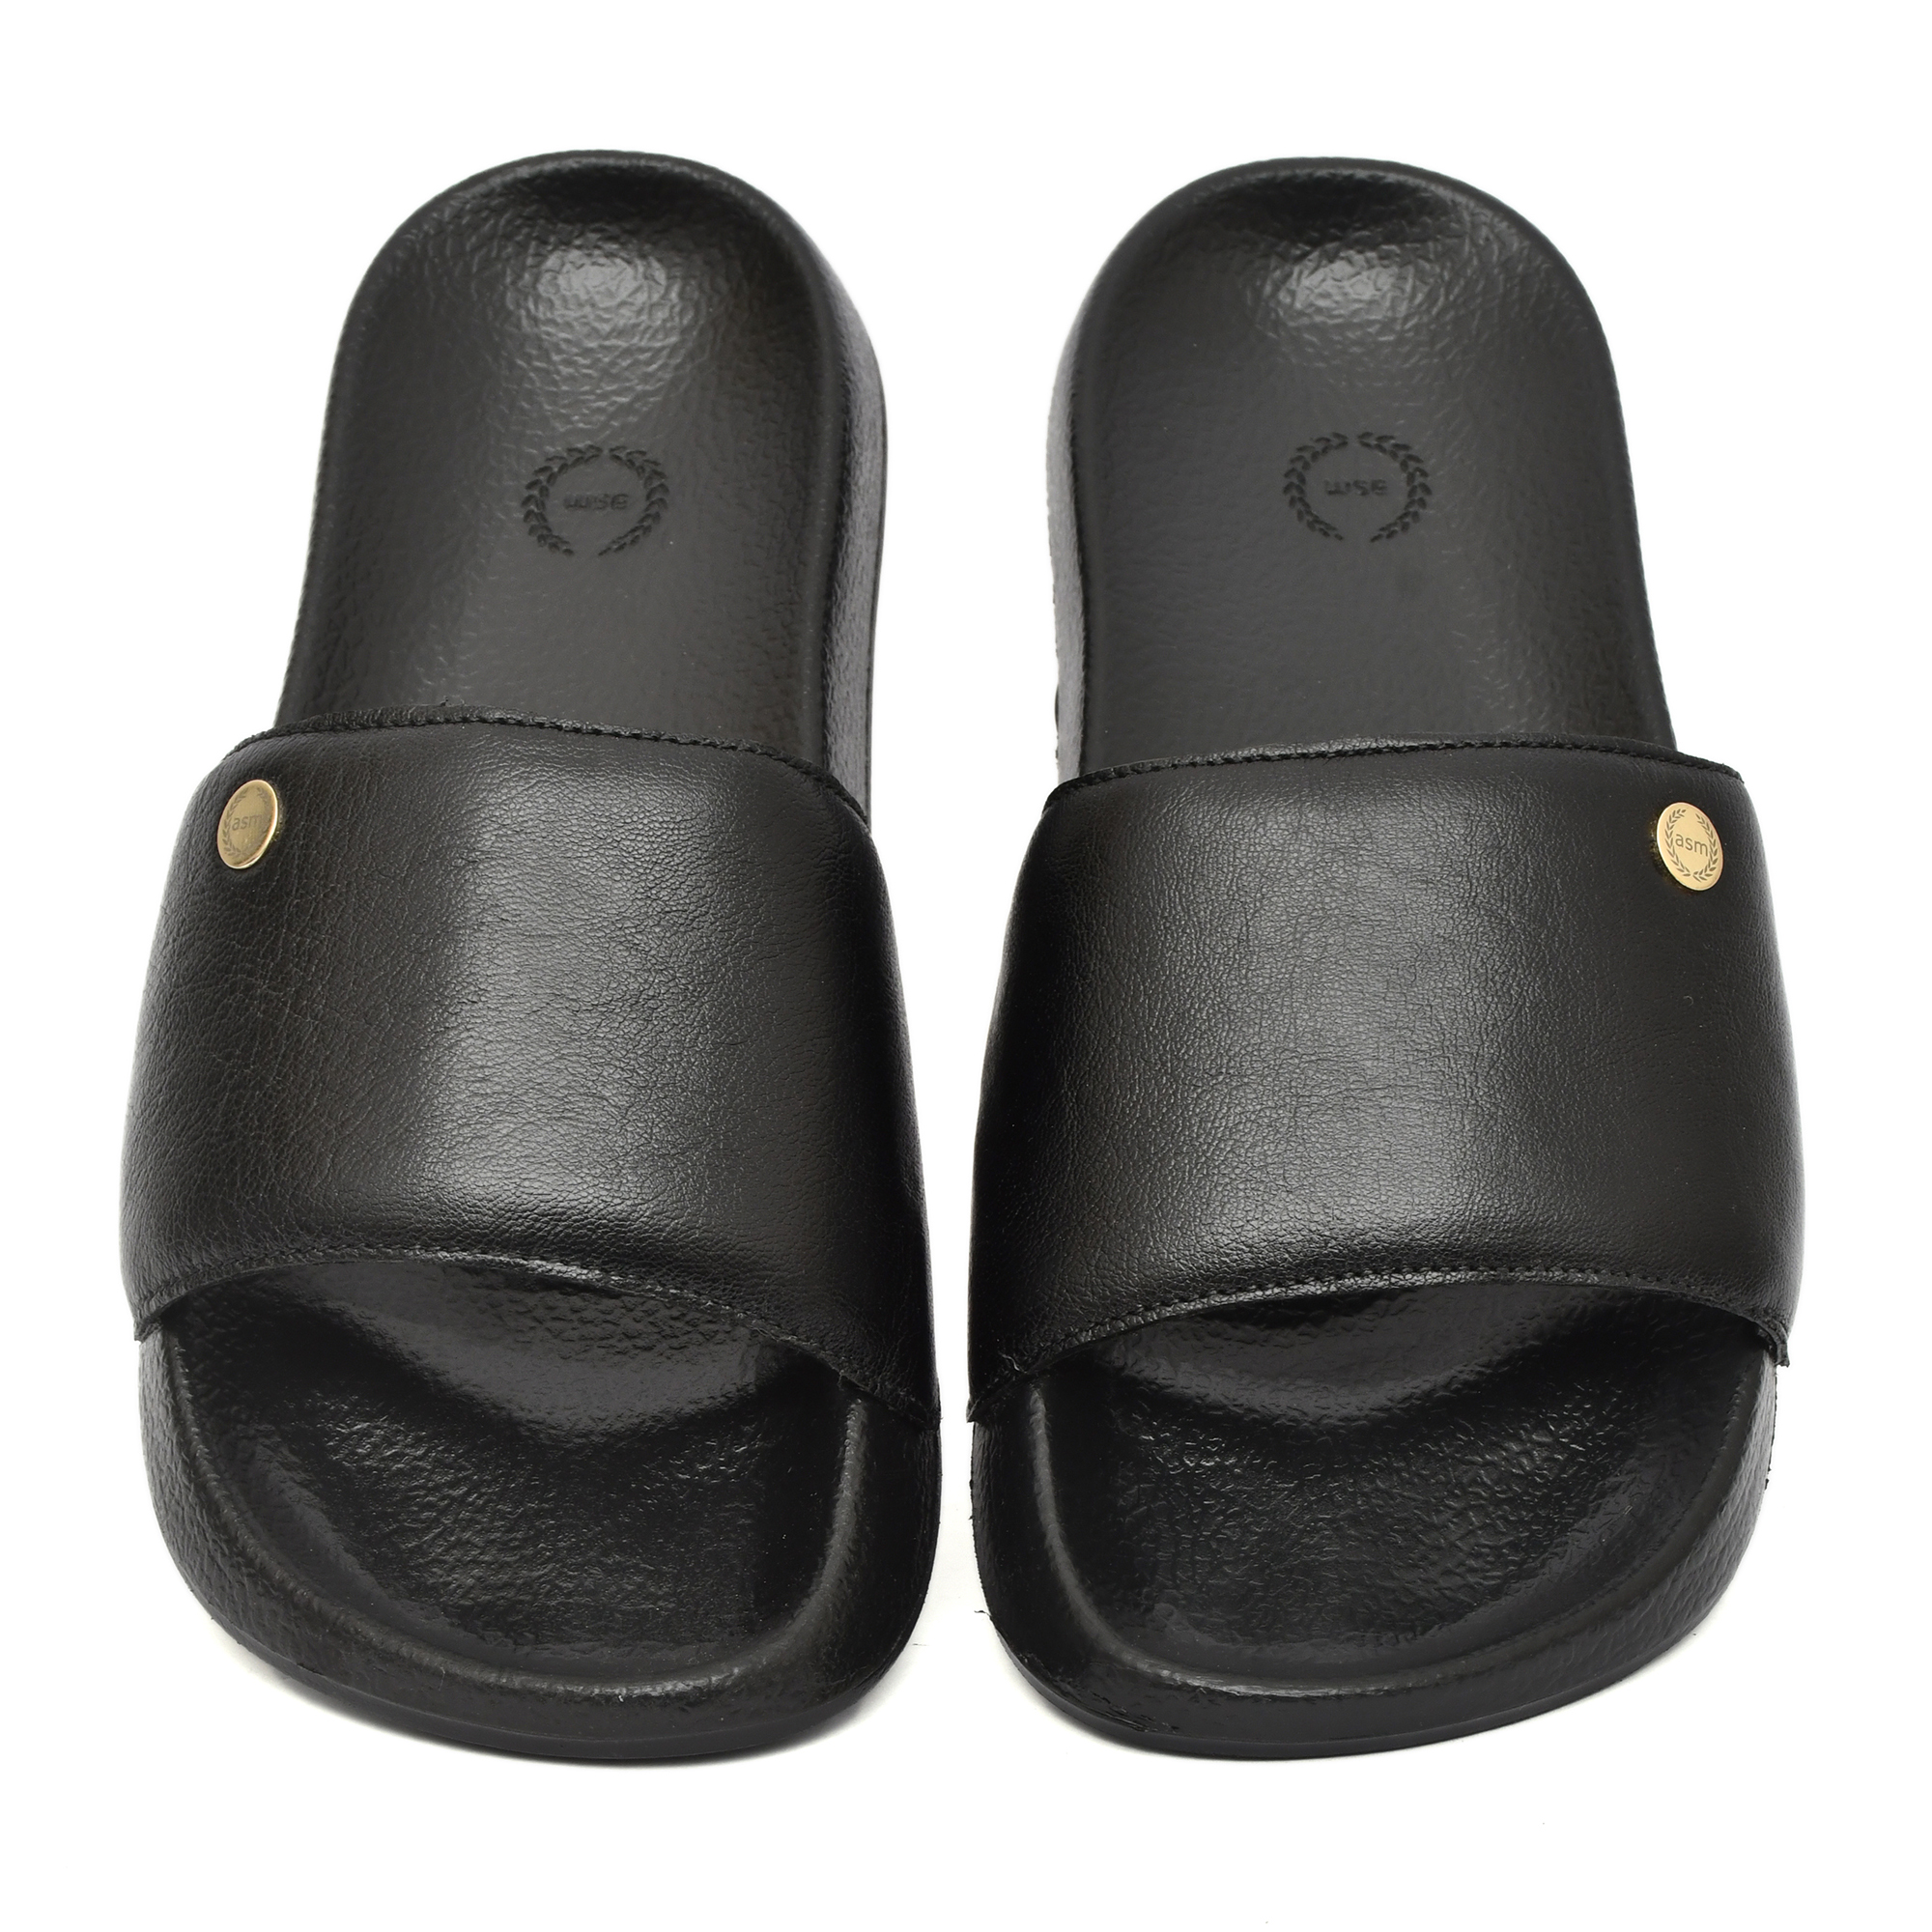 Black Leather Slippers for Men by asm.